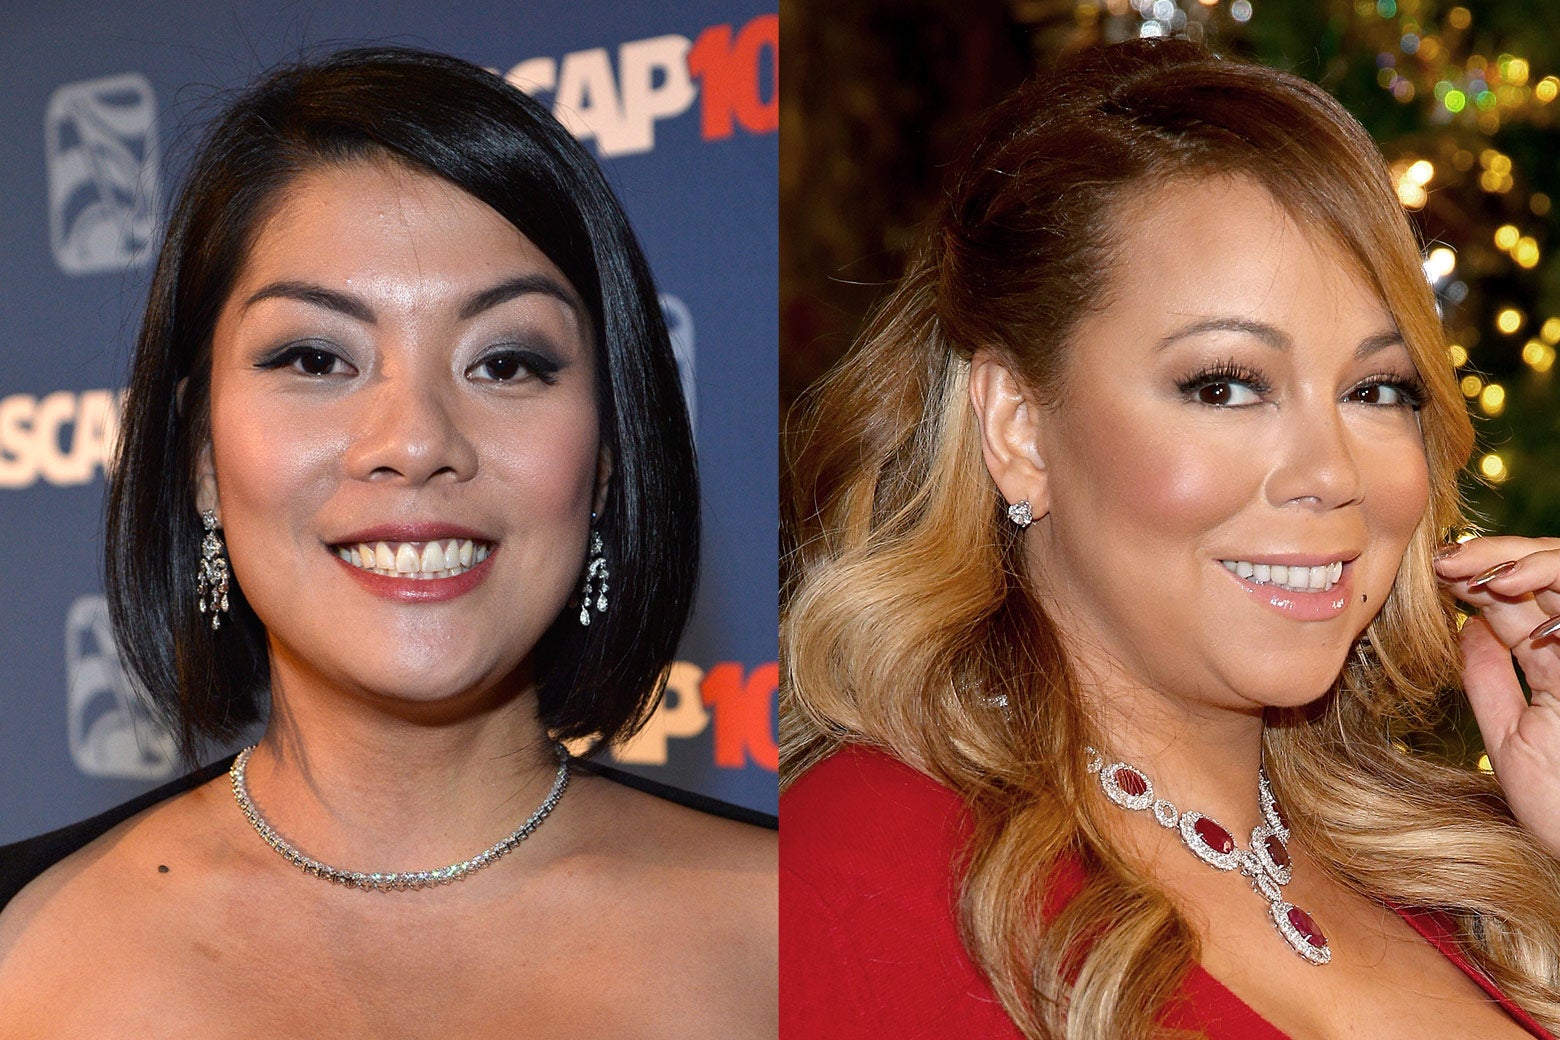 Elizabeth Chan wears earrings and has a blunt bob on the left, while Mariah Carey wears a red necklace and top on the right.